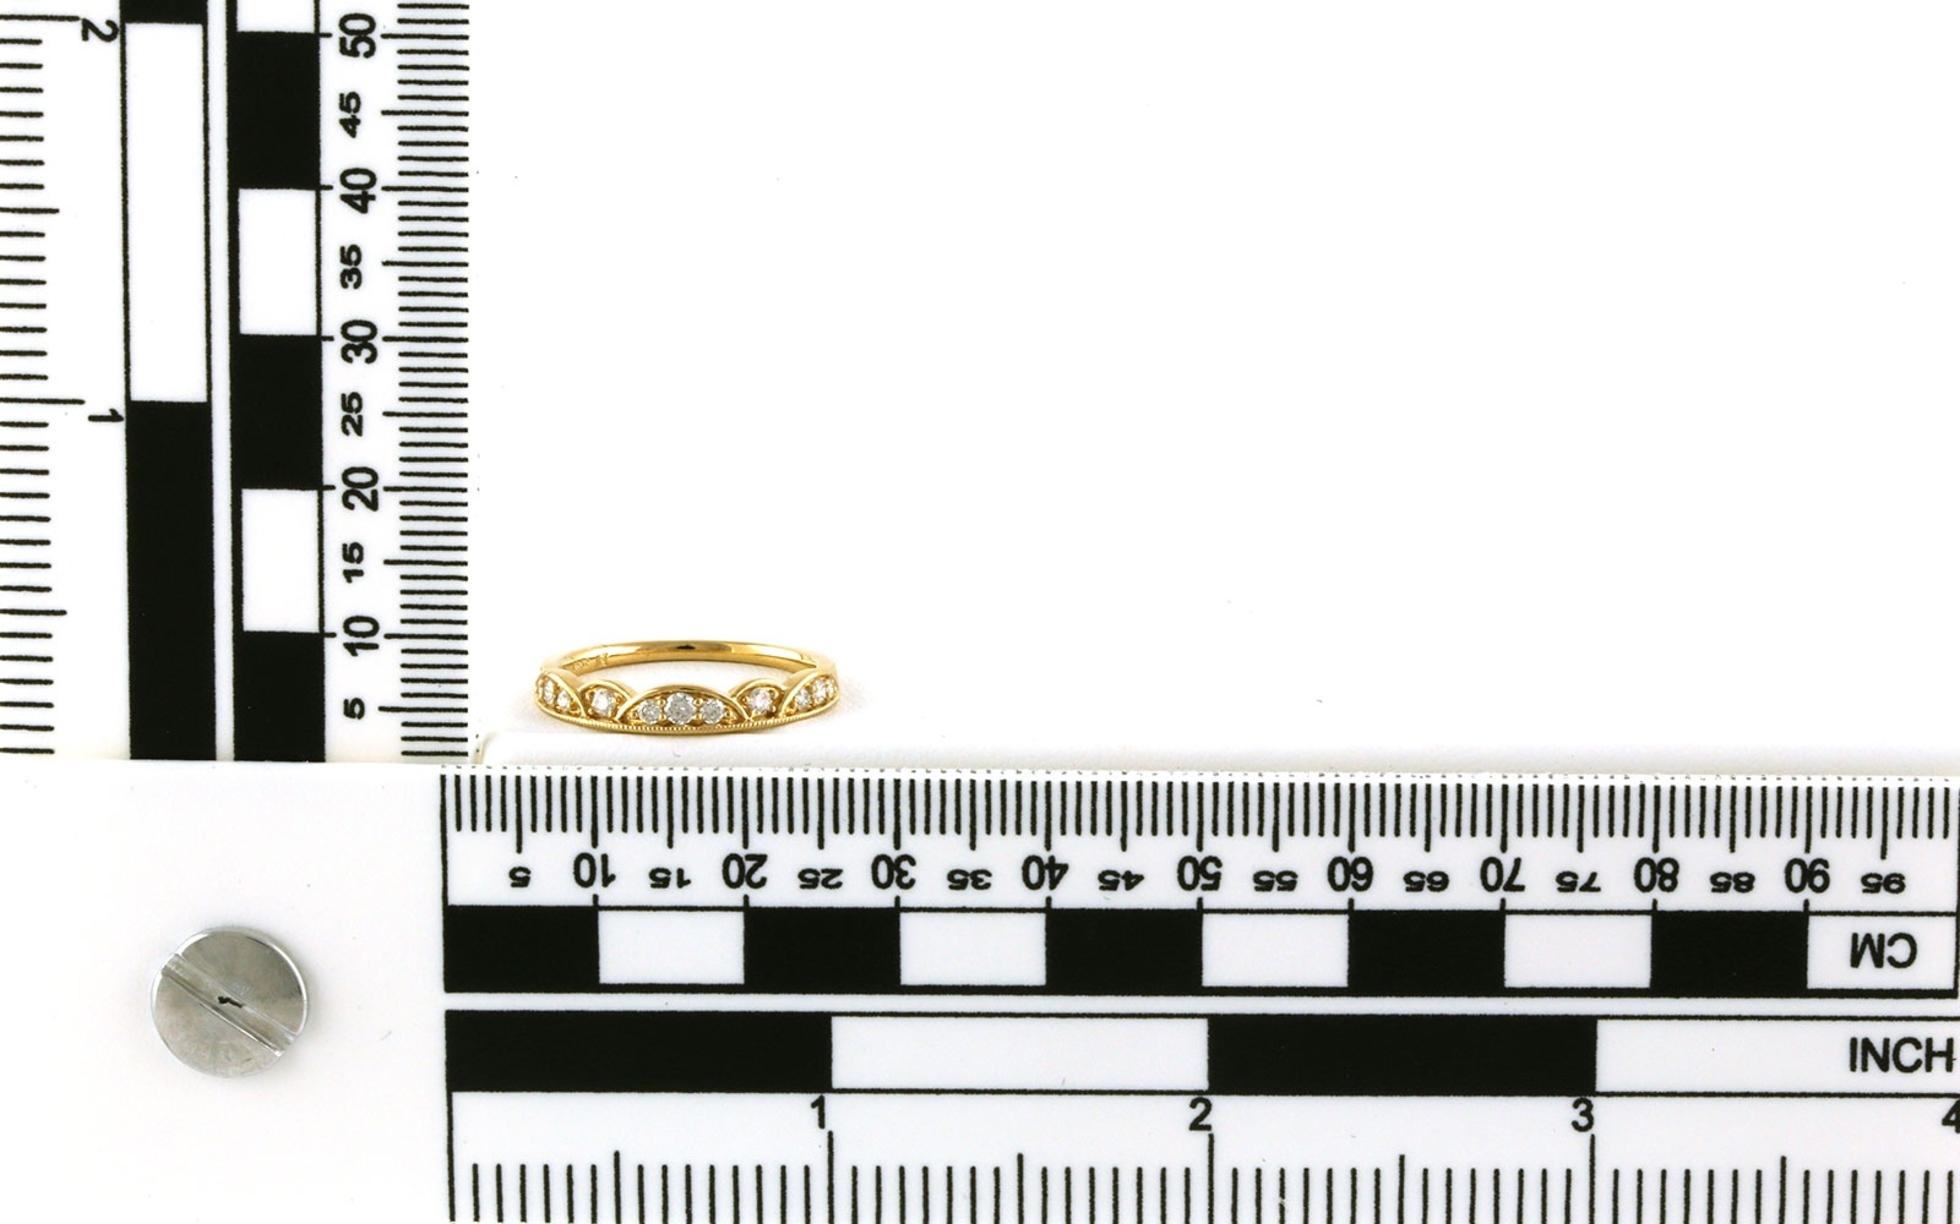 Scalloped Edge Diamond Wedding Band in Yellow Gold (0.23cts TWT) Scale